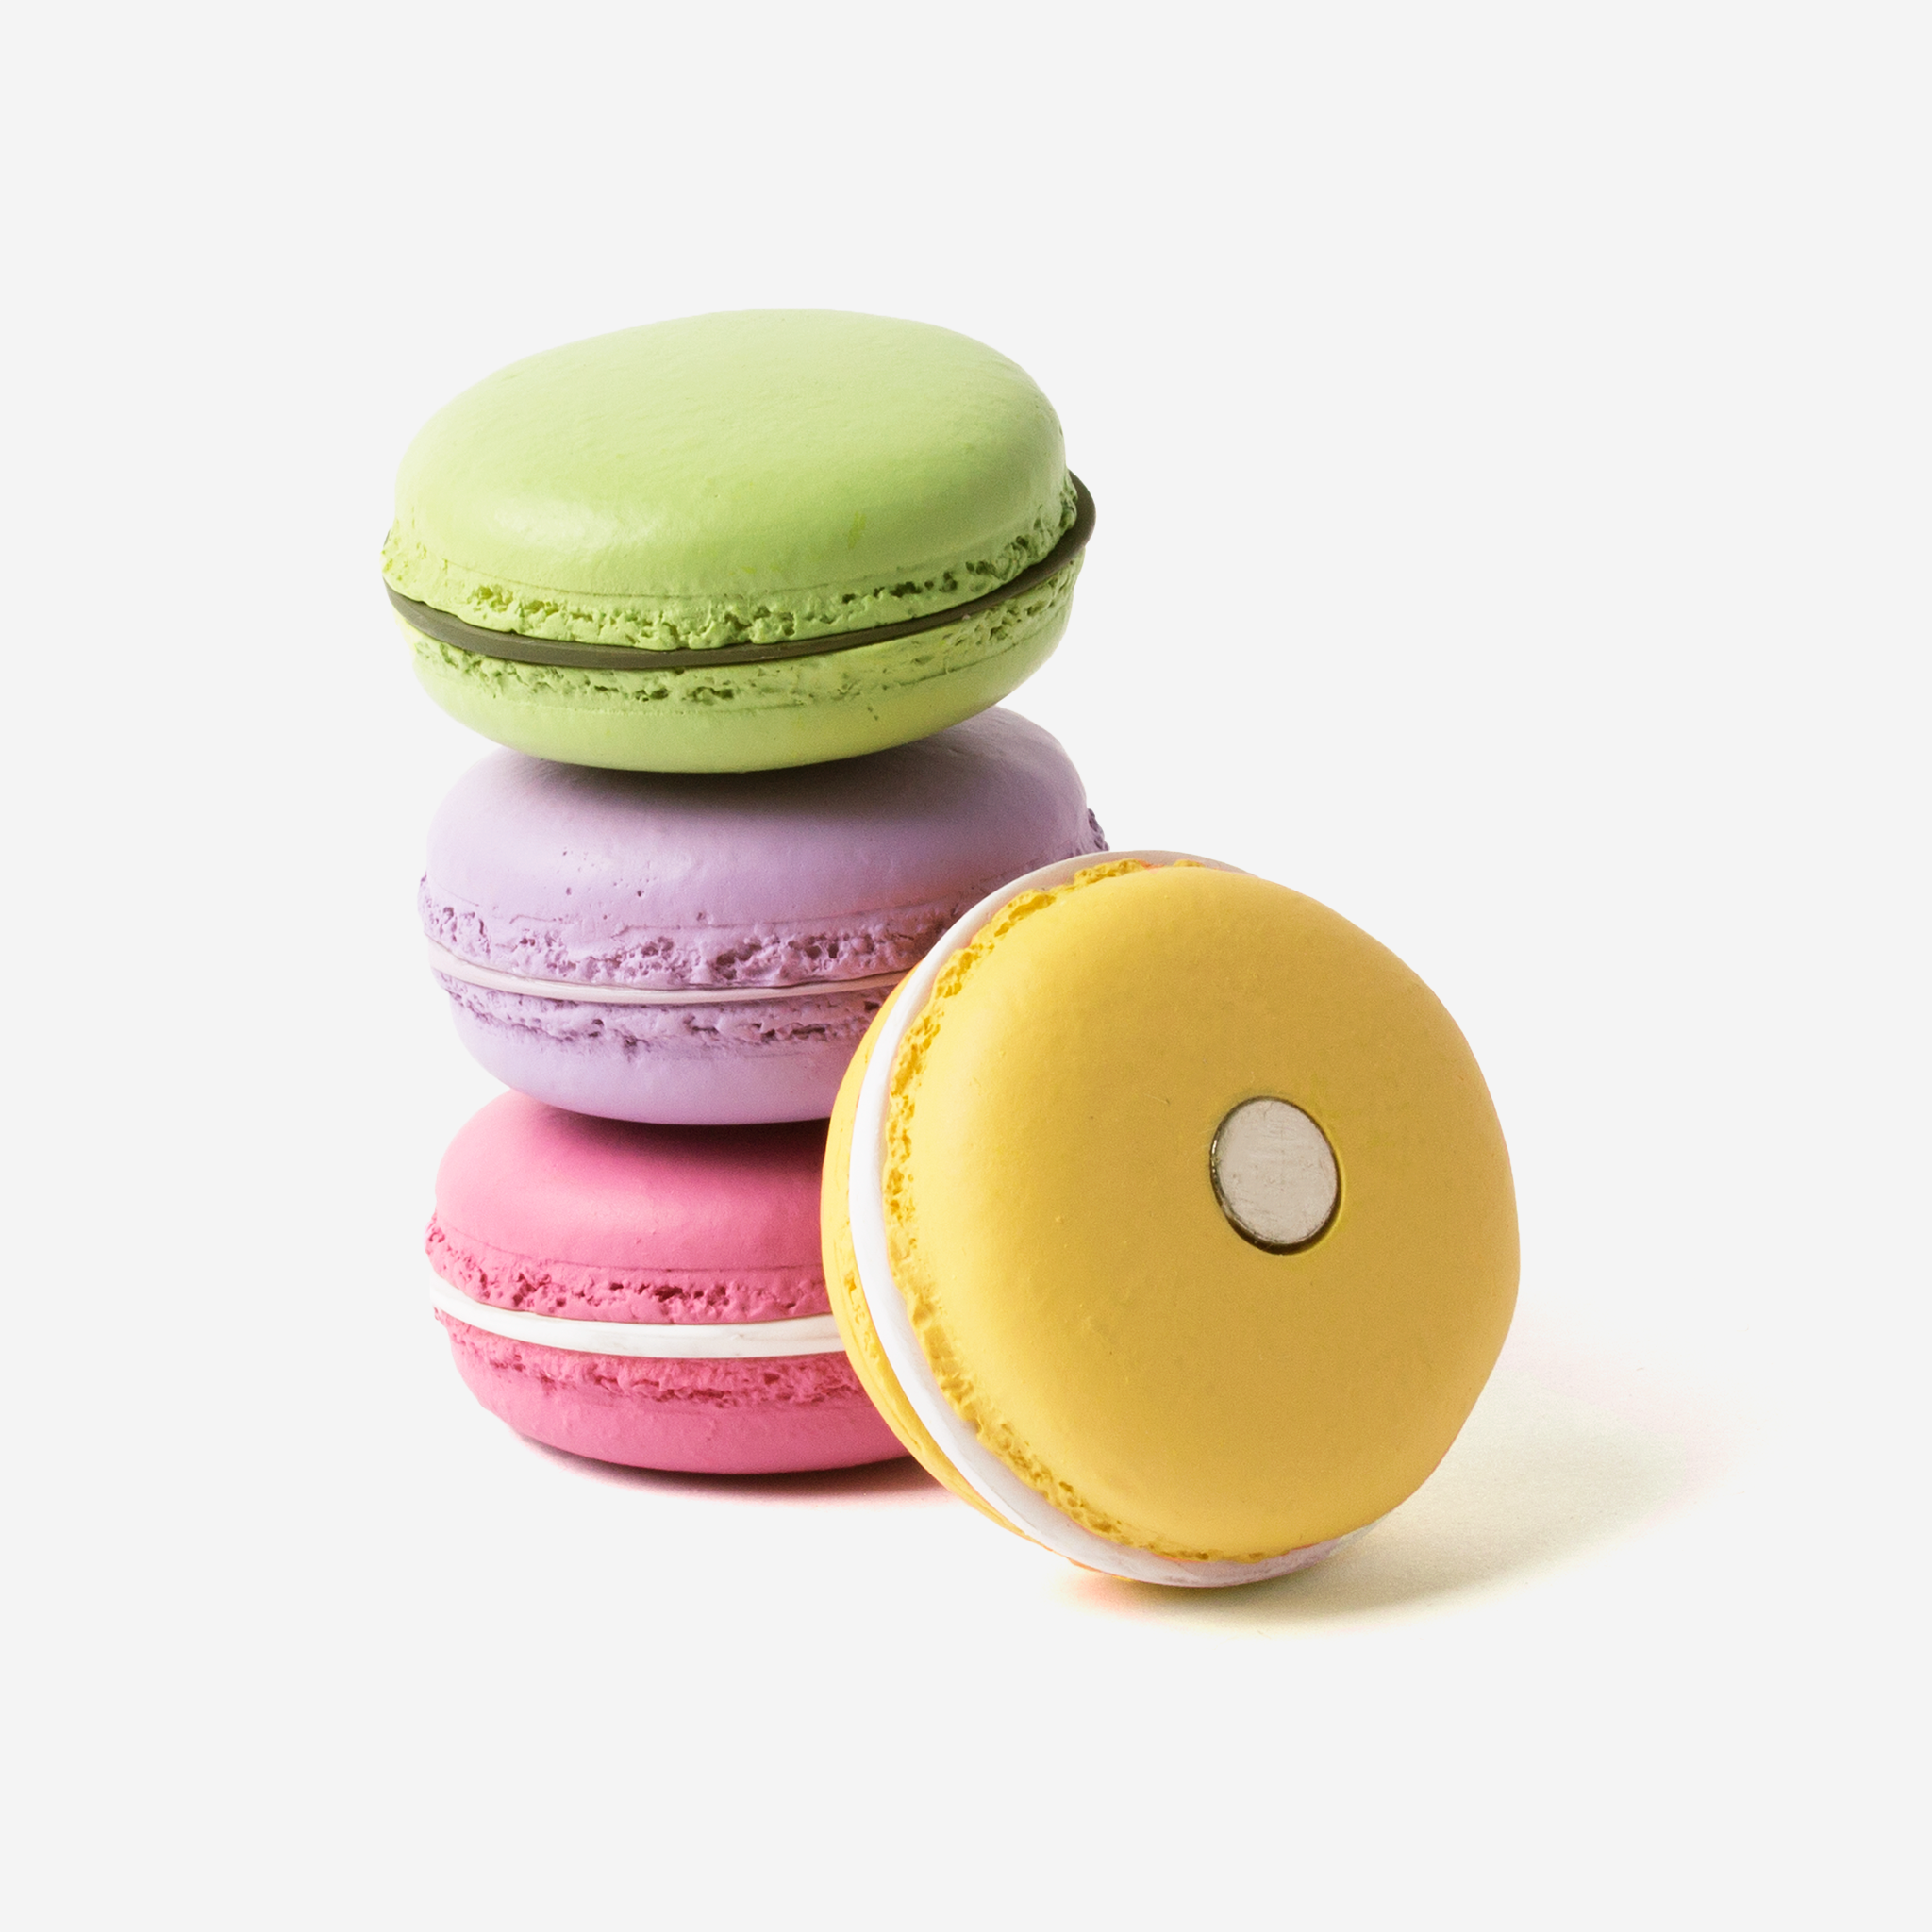 MACARON MAGNETS SET OF TWO - Hadron Epoch